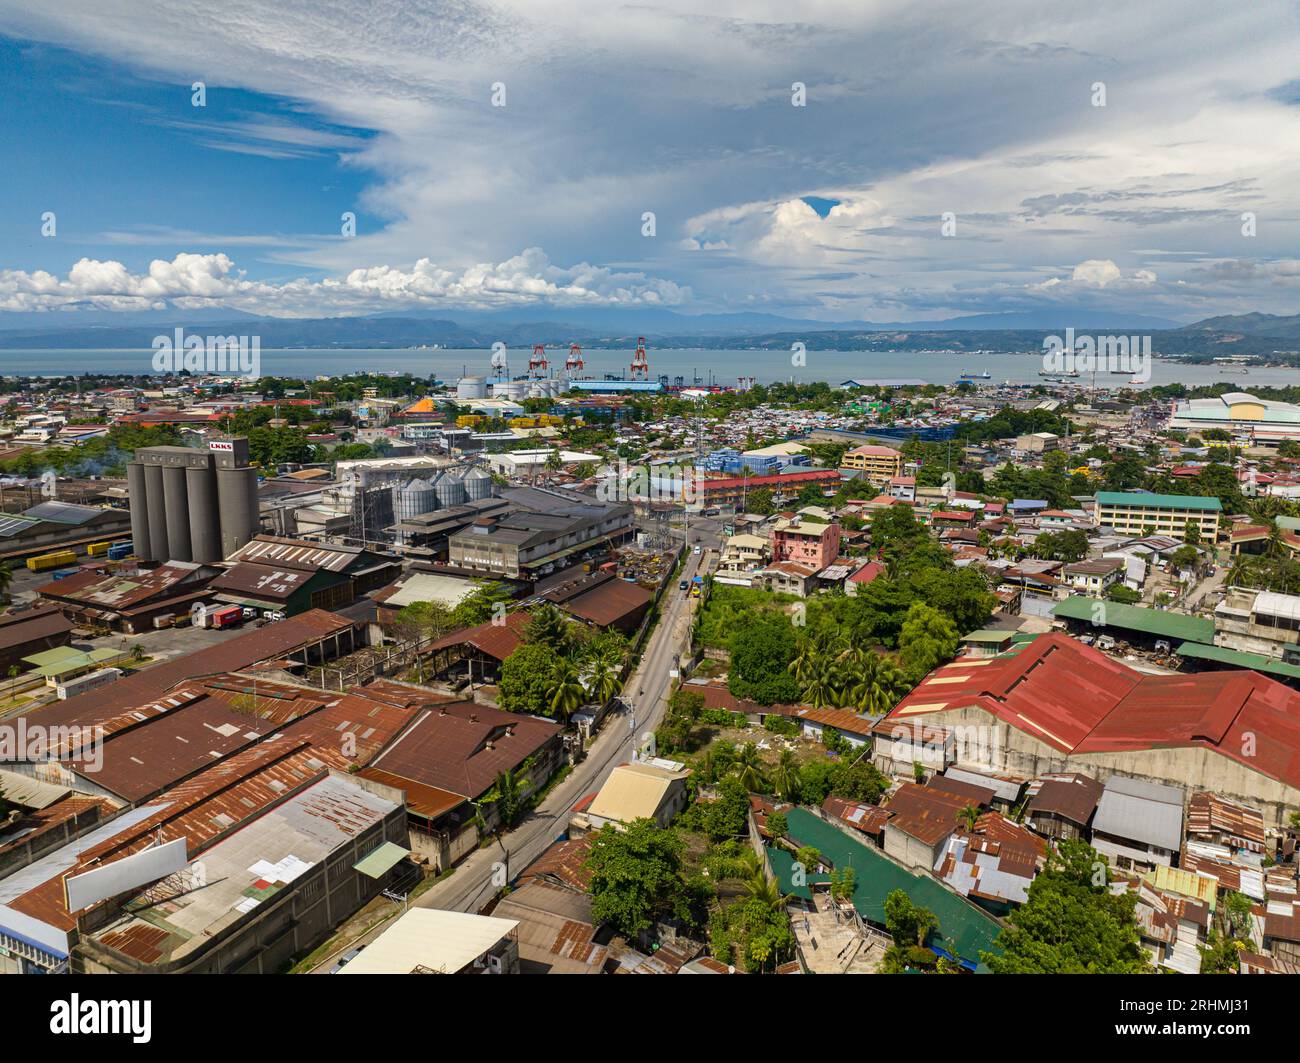 Modern buildings and residential area in City of Cagayan de Oro. Blue sky and clouds. Mindanao, Philippines. Stock Photo